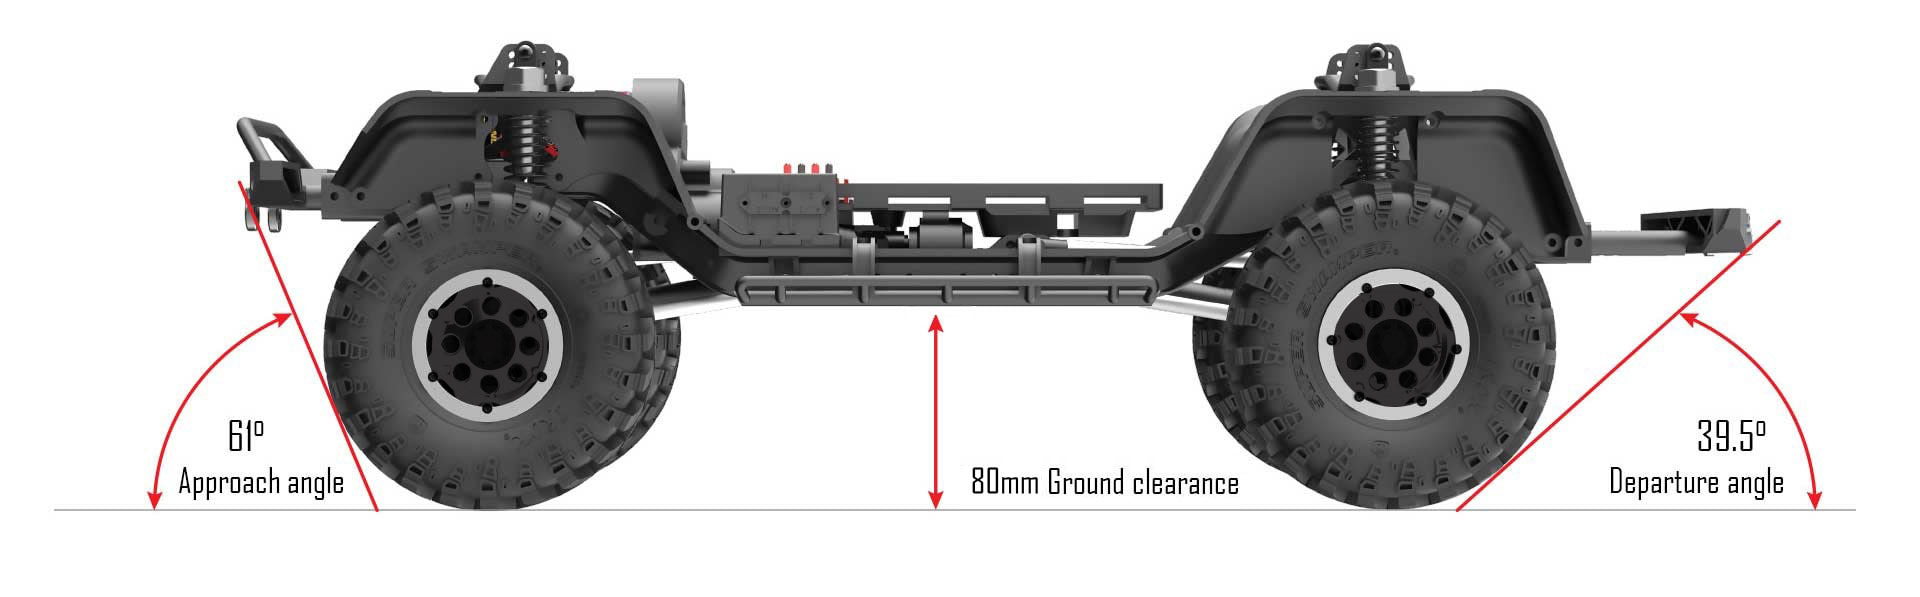 Redcat Racing Gen8 Axe Edition Ground Clearance and Departure Angle